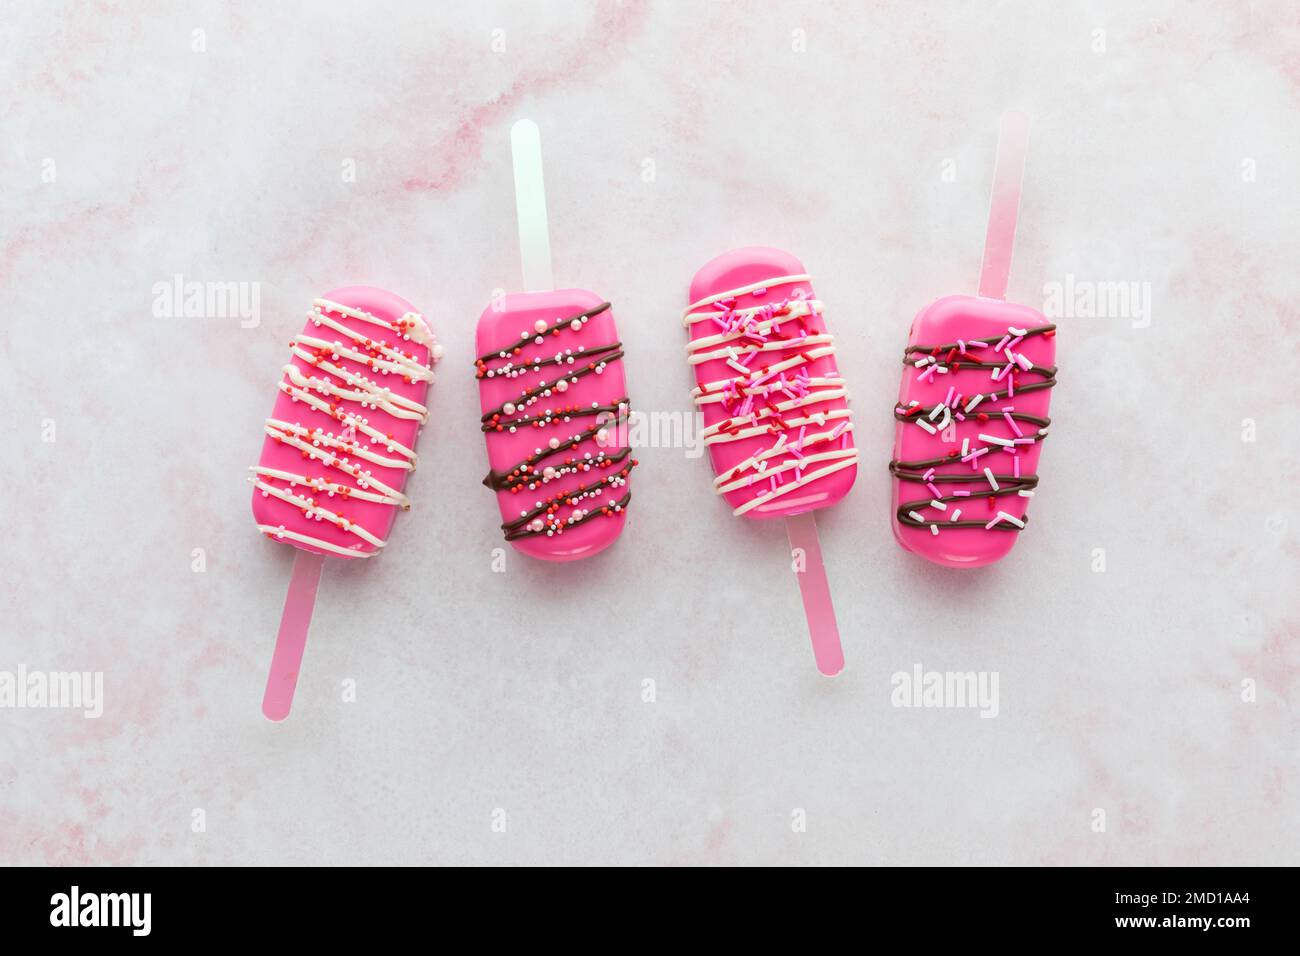 Homemade decorated cakesicles for Valentine's Day, on a pink marble surface. Stock Photo